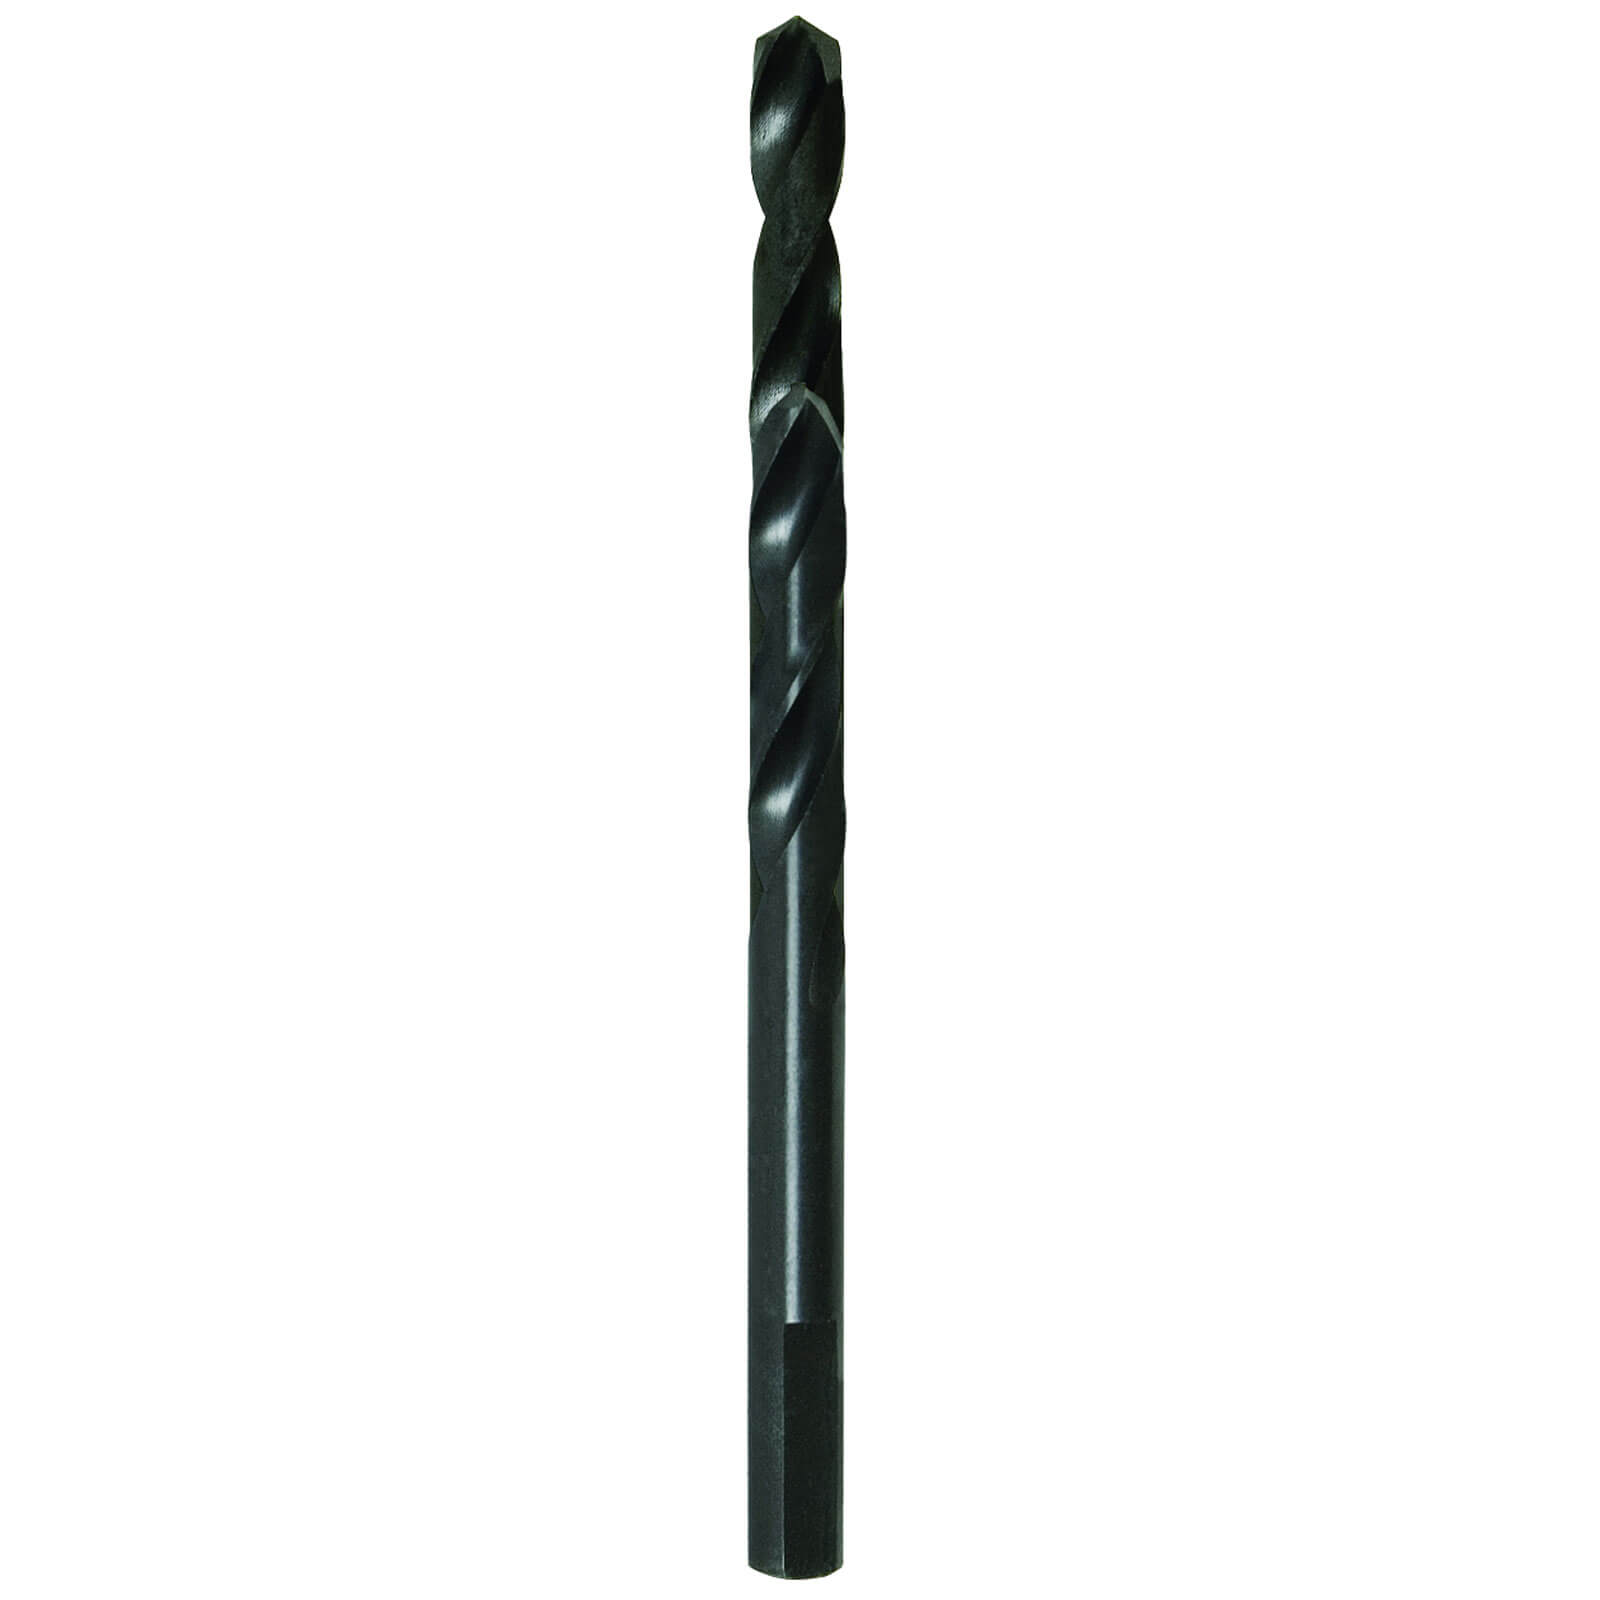 Photo of Lenox Pilot Drill Bit For 1l And 4l Hole Saw Arbors